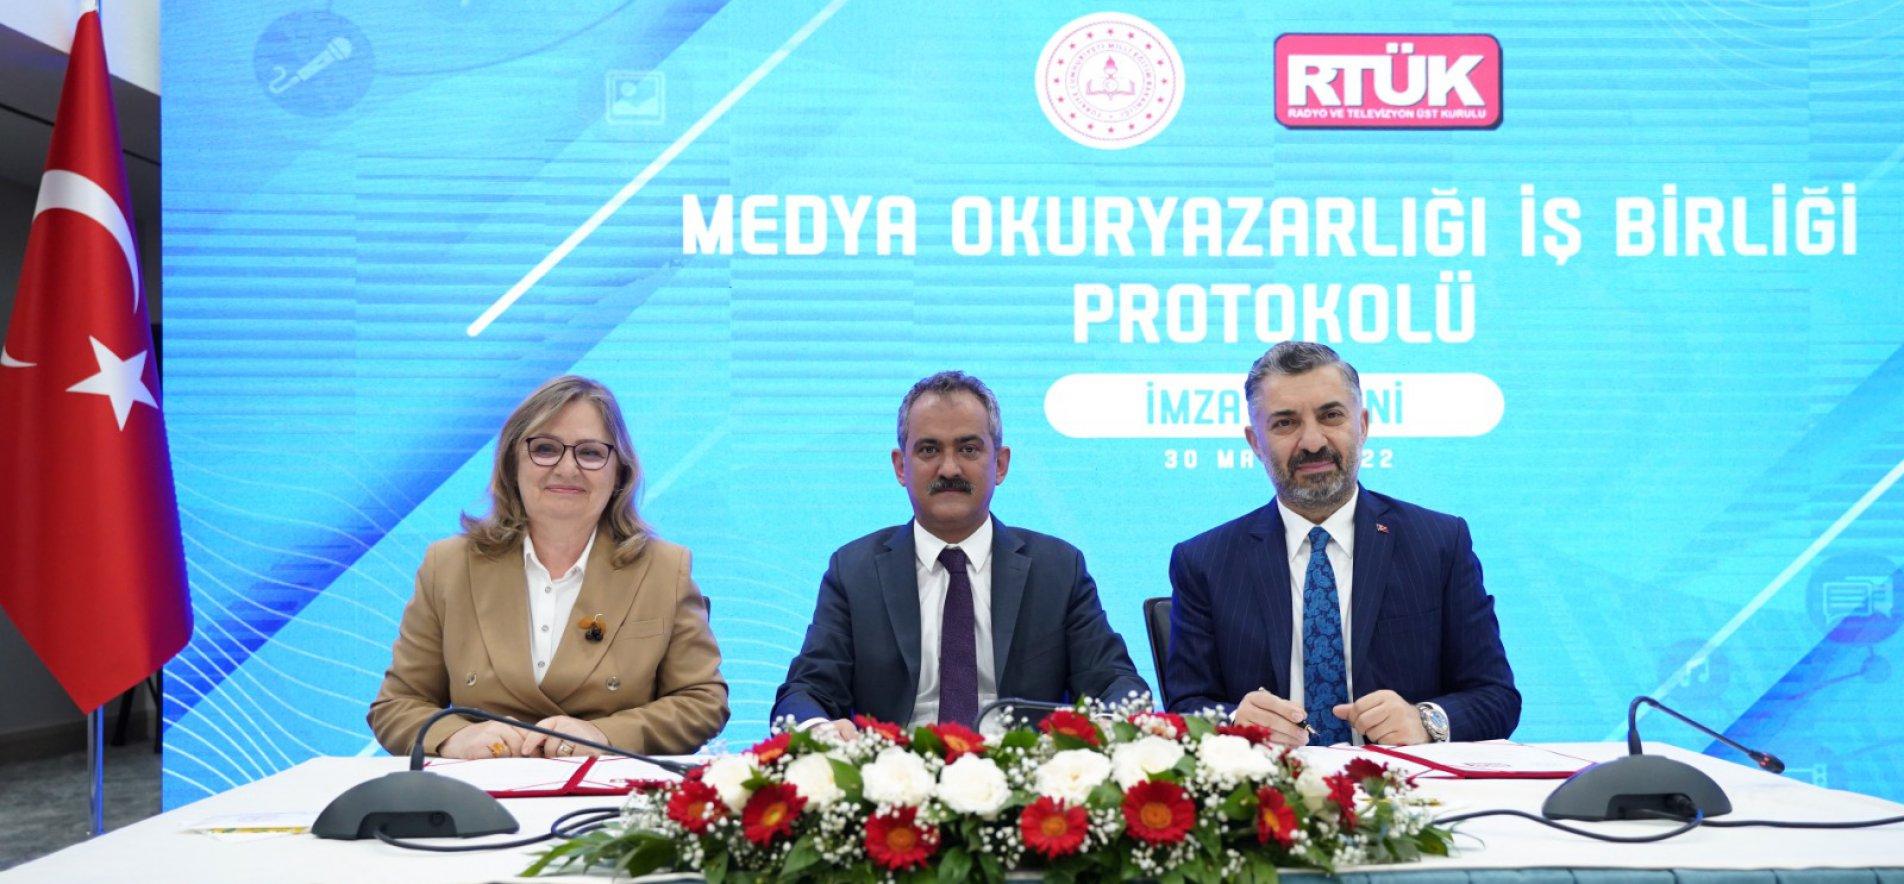 MINISTRY OF NATIONAL EDUCATION SIGNS MEDIA LITERACY COOPERATION PROTOCOL WITH RTÜK